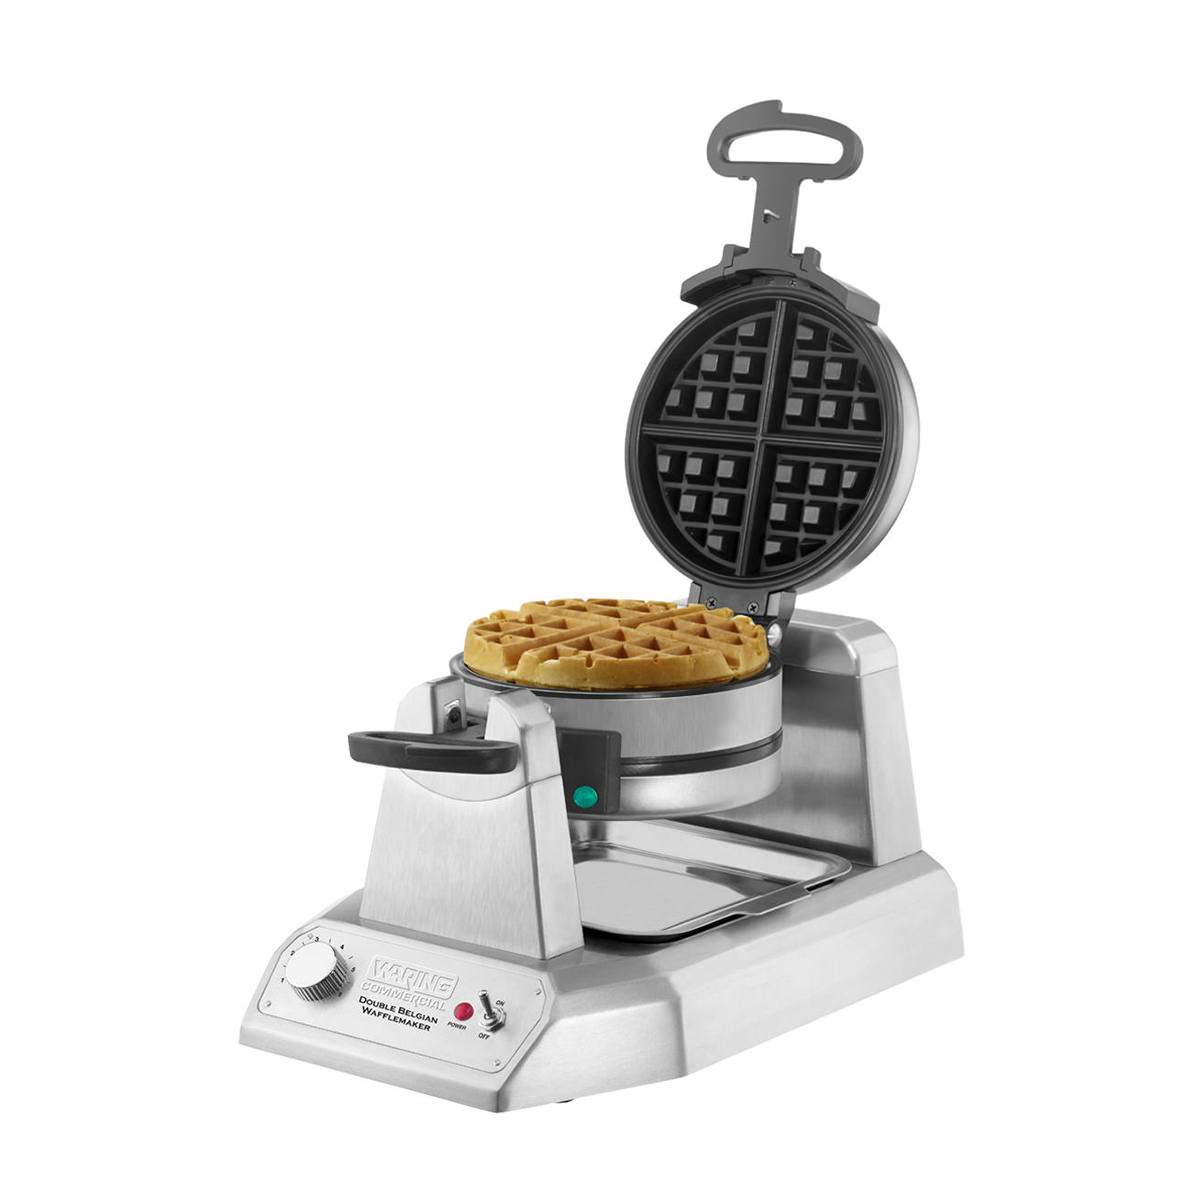 https://www.waringcommercialproducts.com/files/products/ww200-waring-double-waffle-maker-inset2.jpg